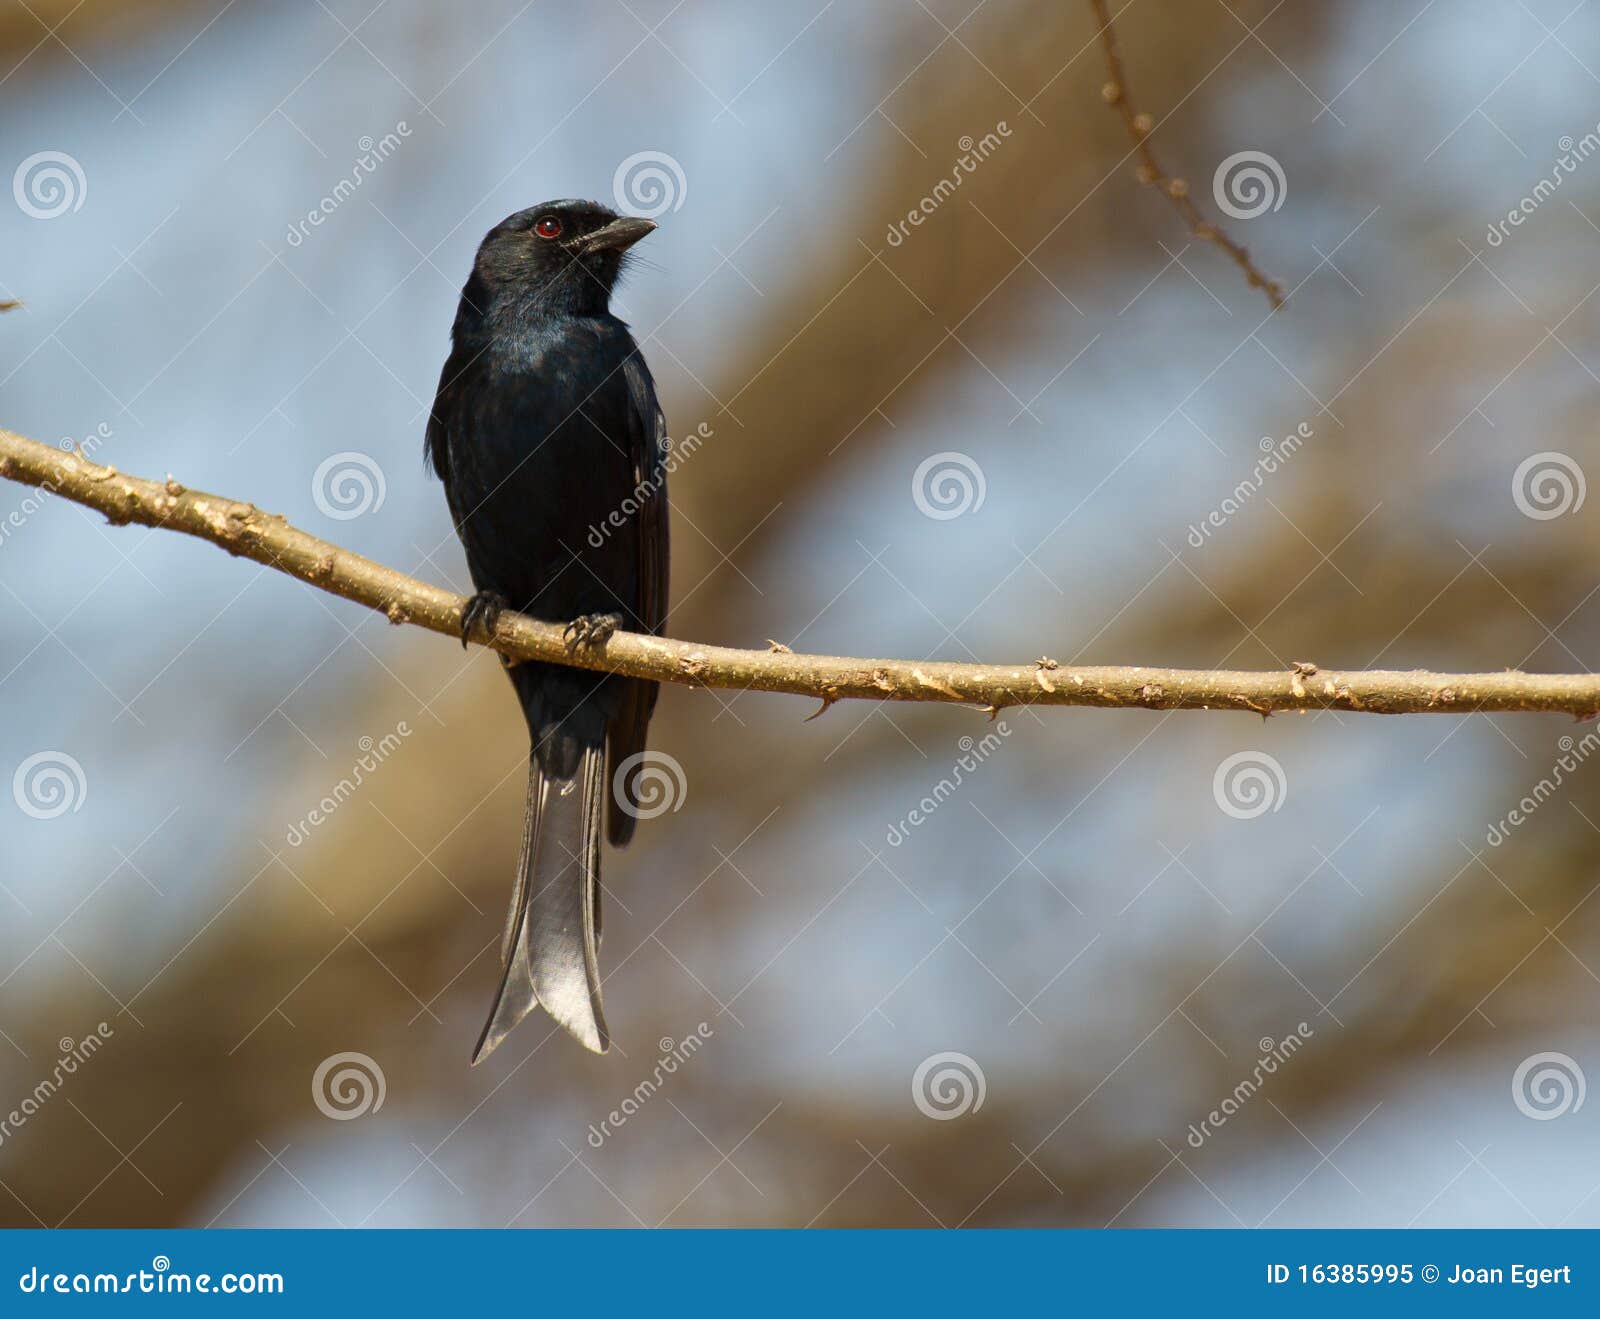 a forked-tailed drongo